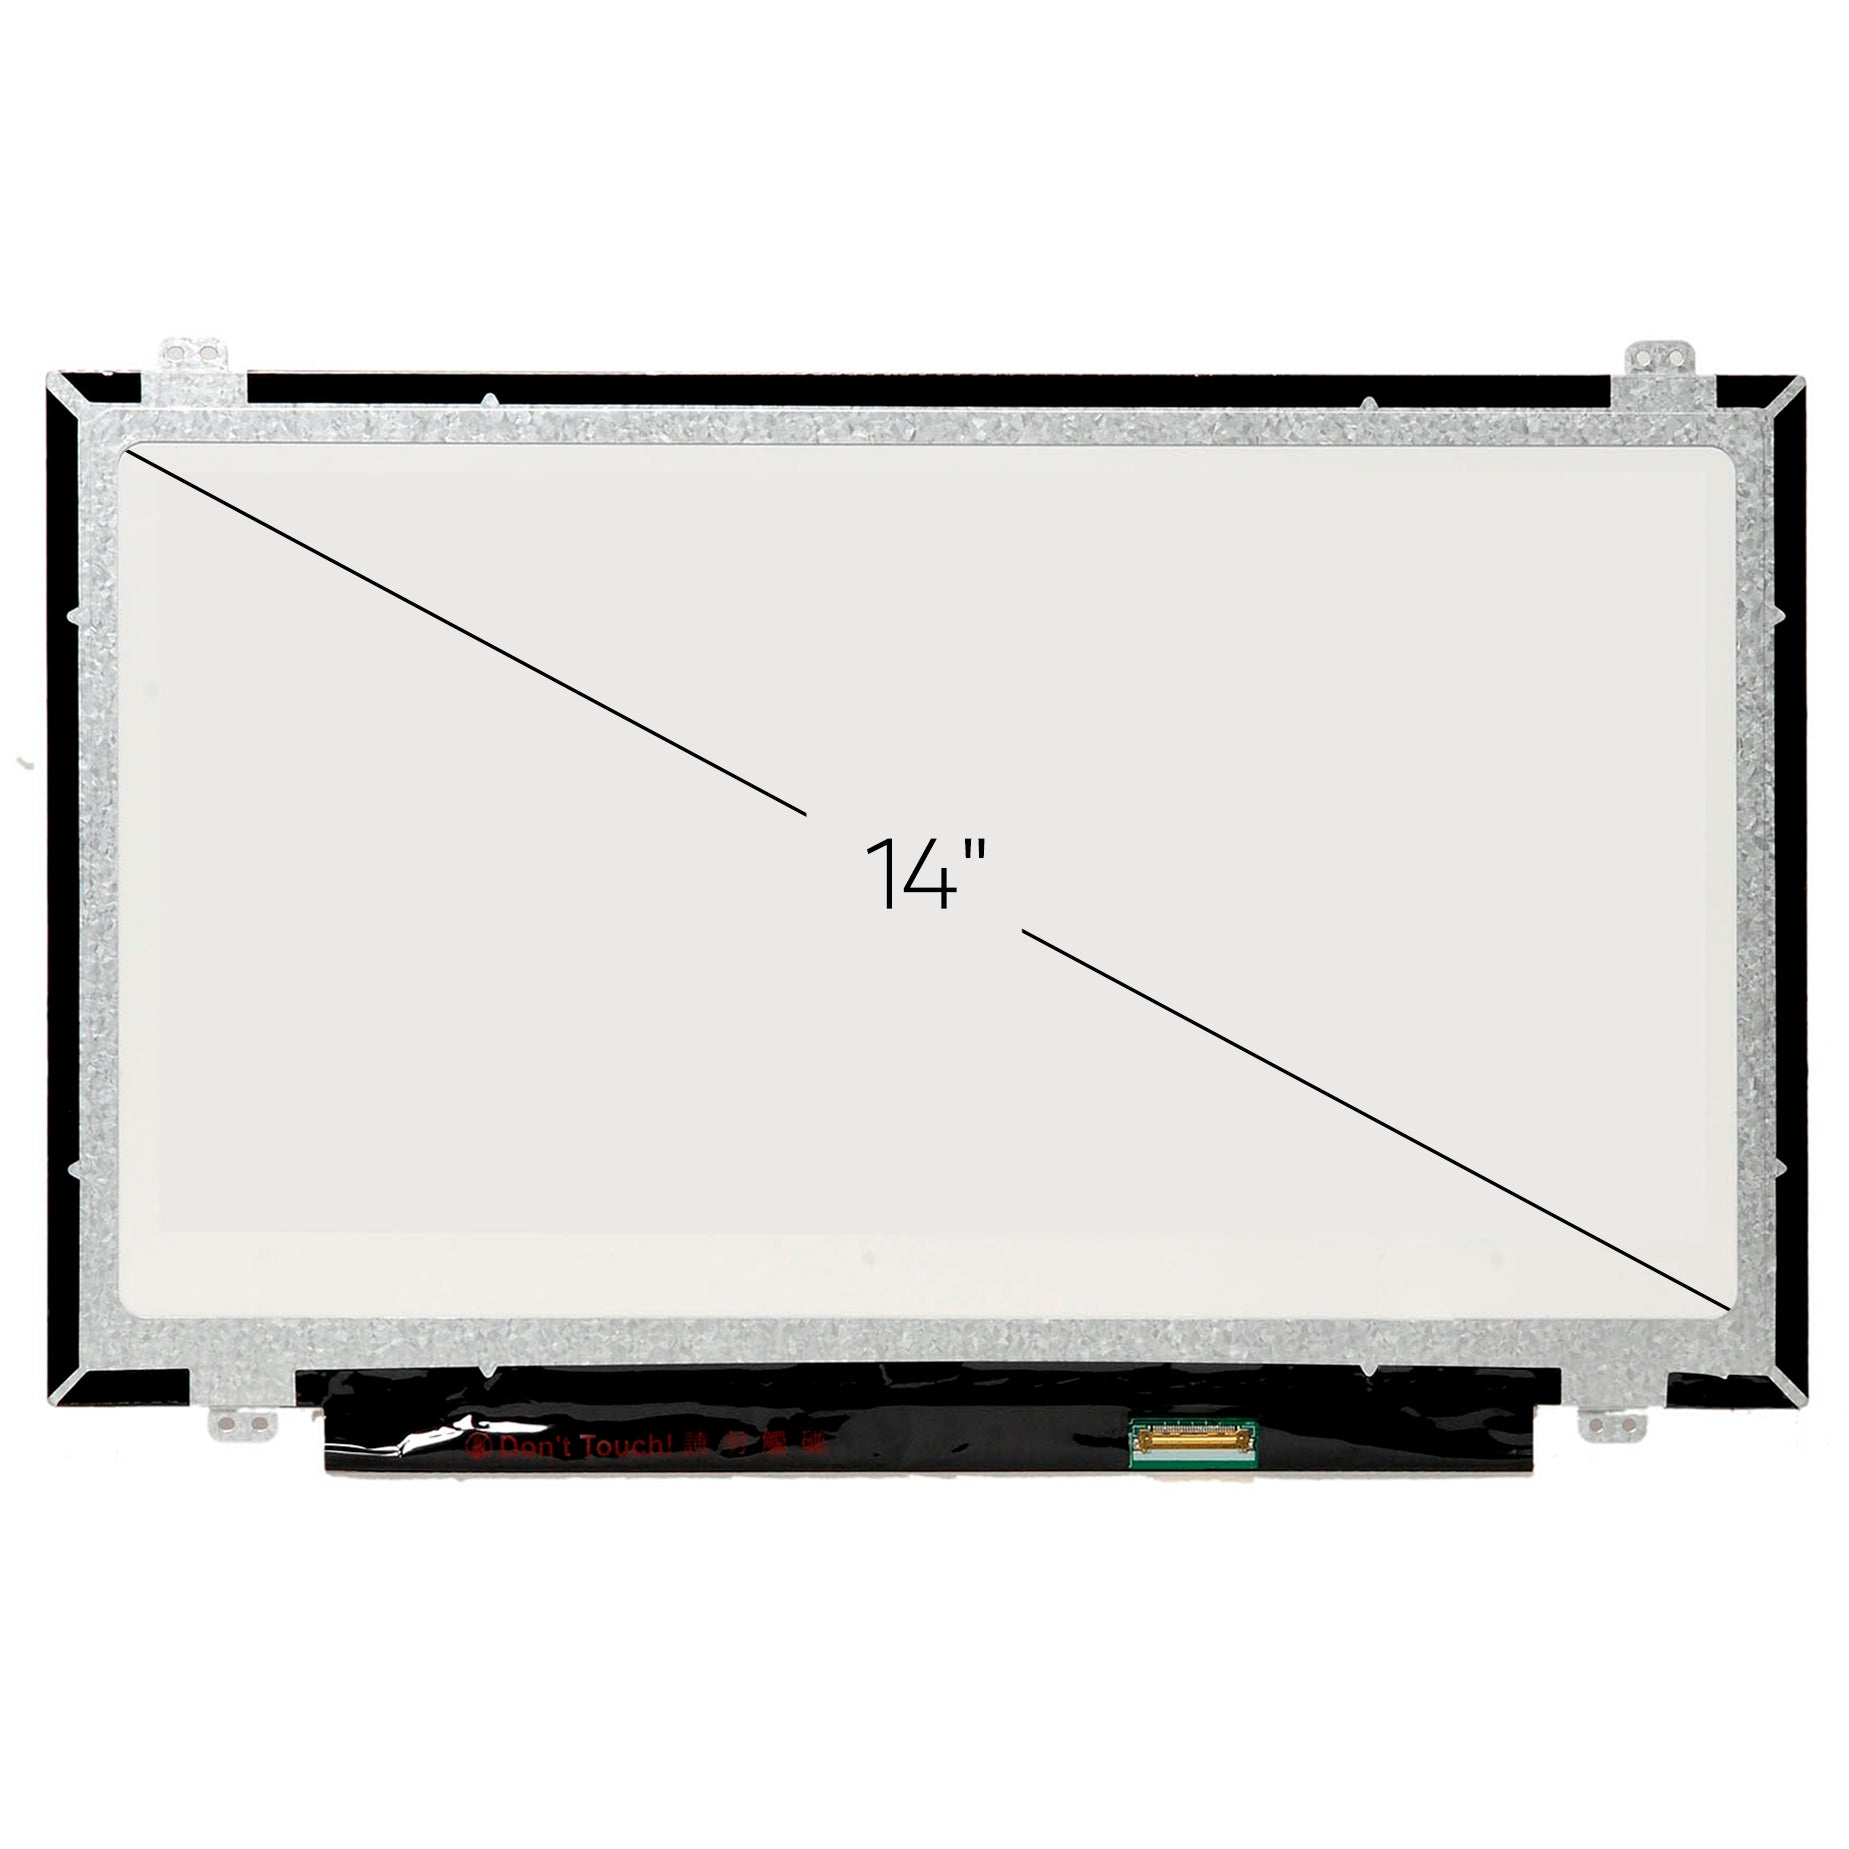 Screen Replacement for LTN140AT31 HD 1366x768 Glossy LCD LED Display